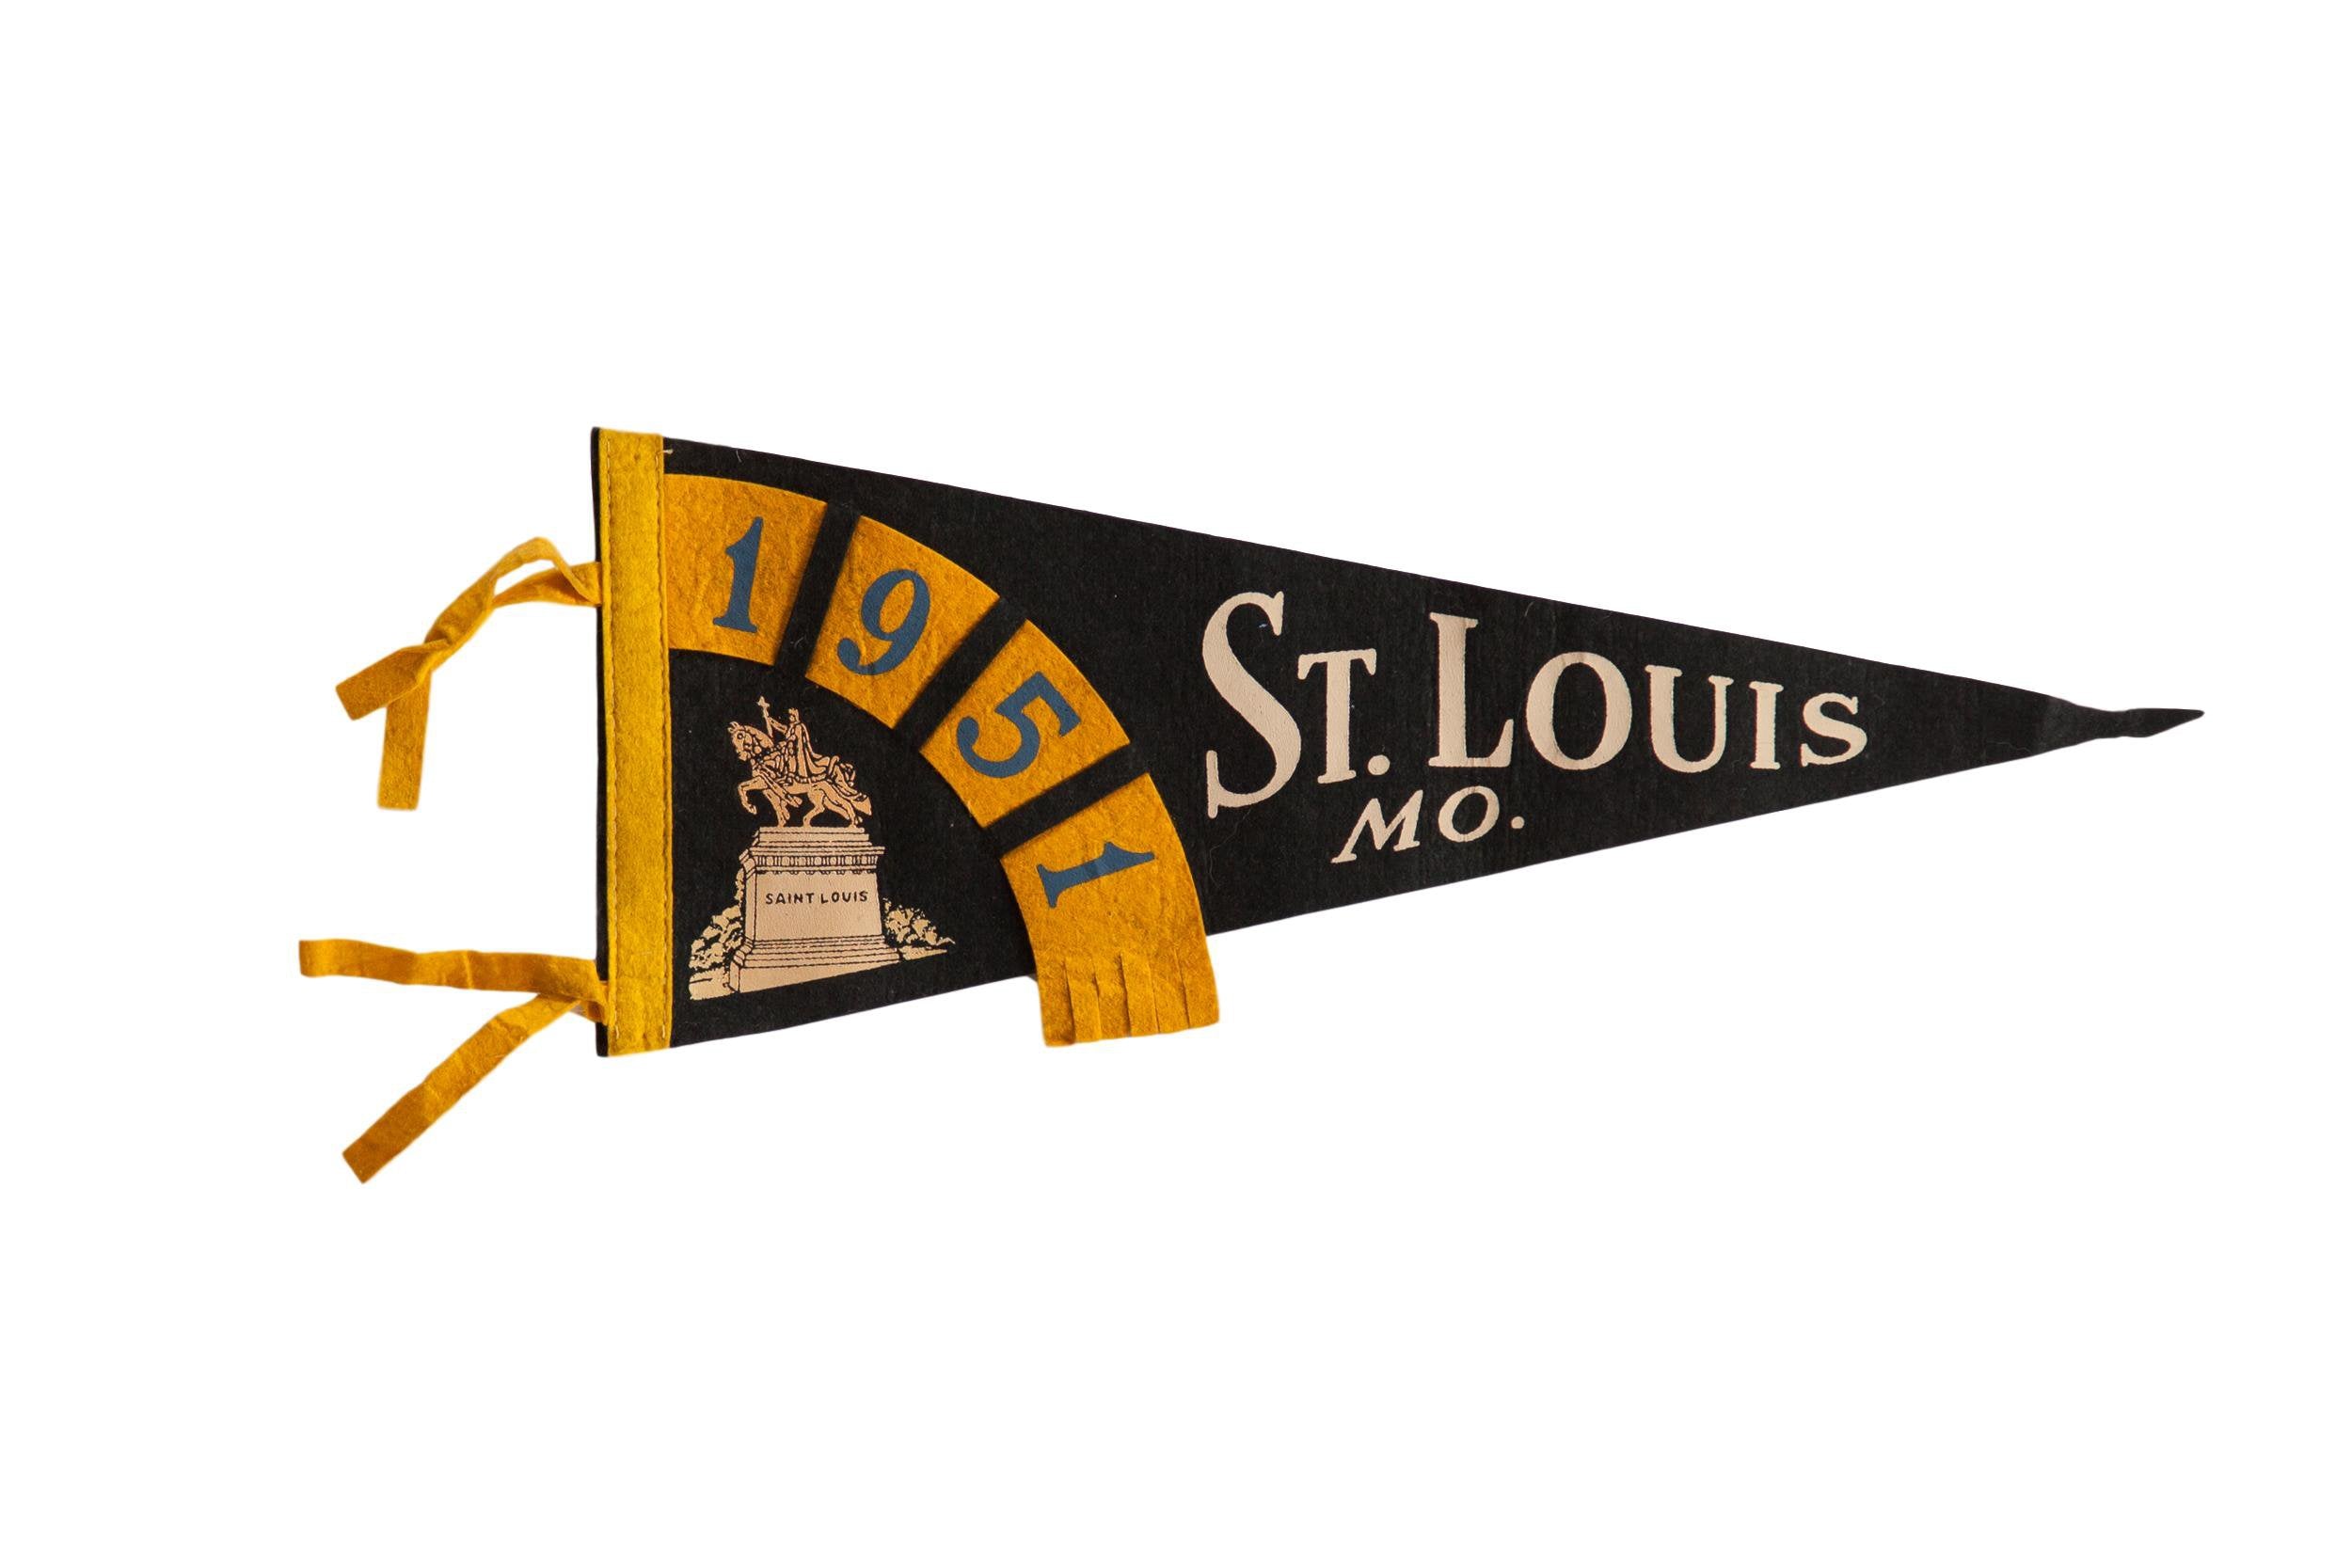 The History of the St. Louis Flag